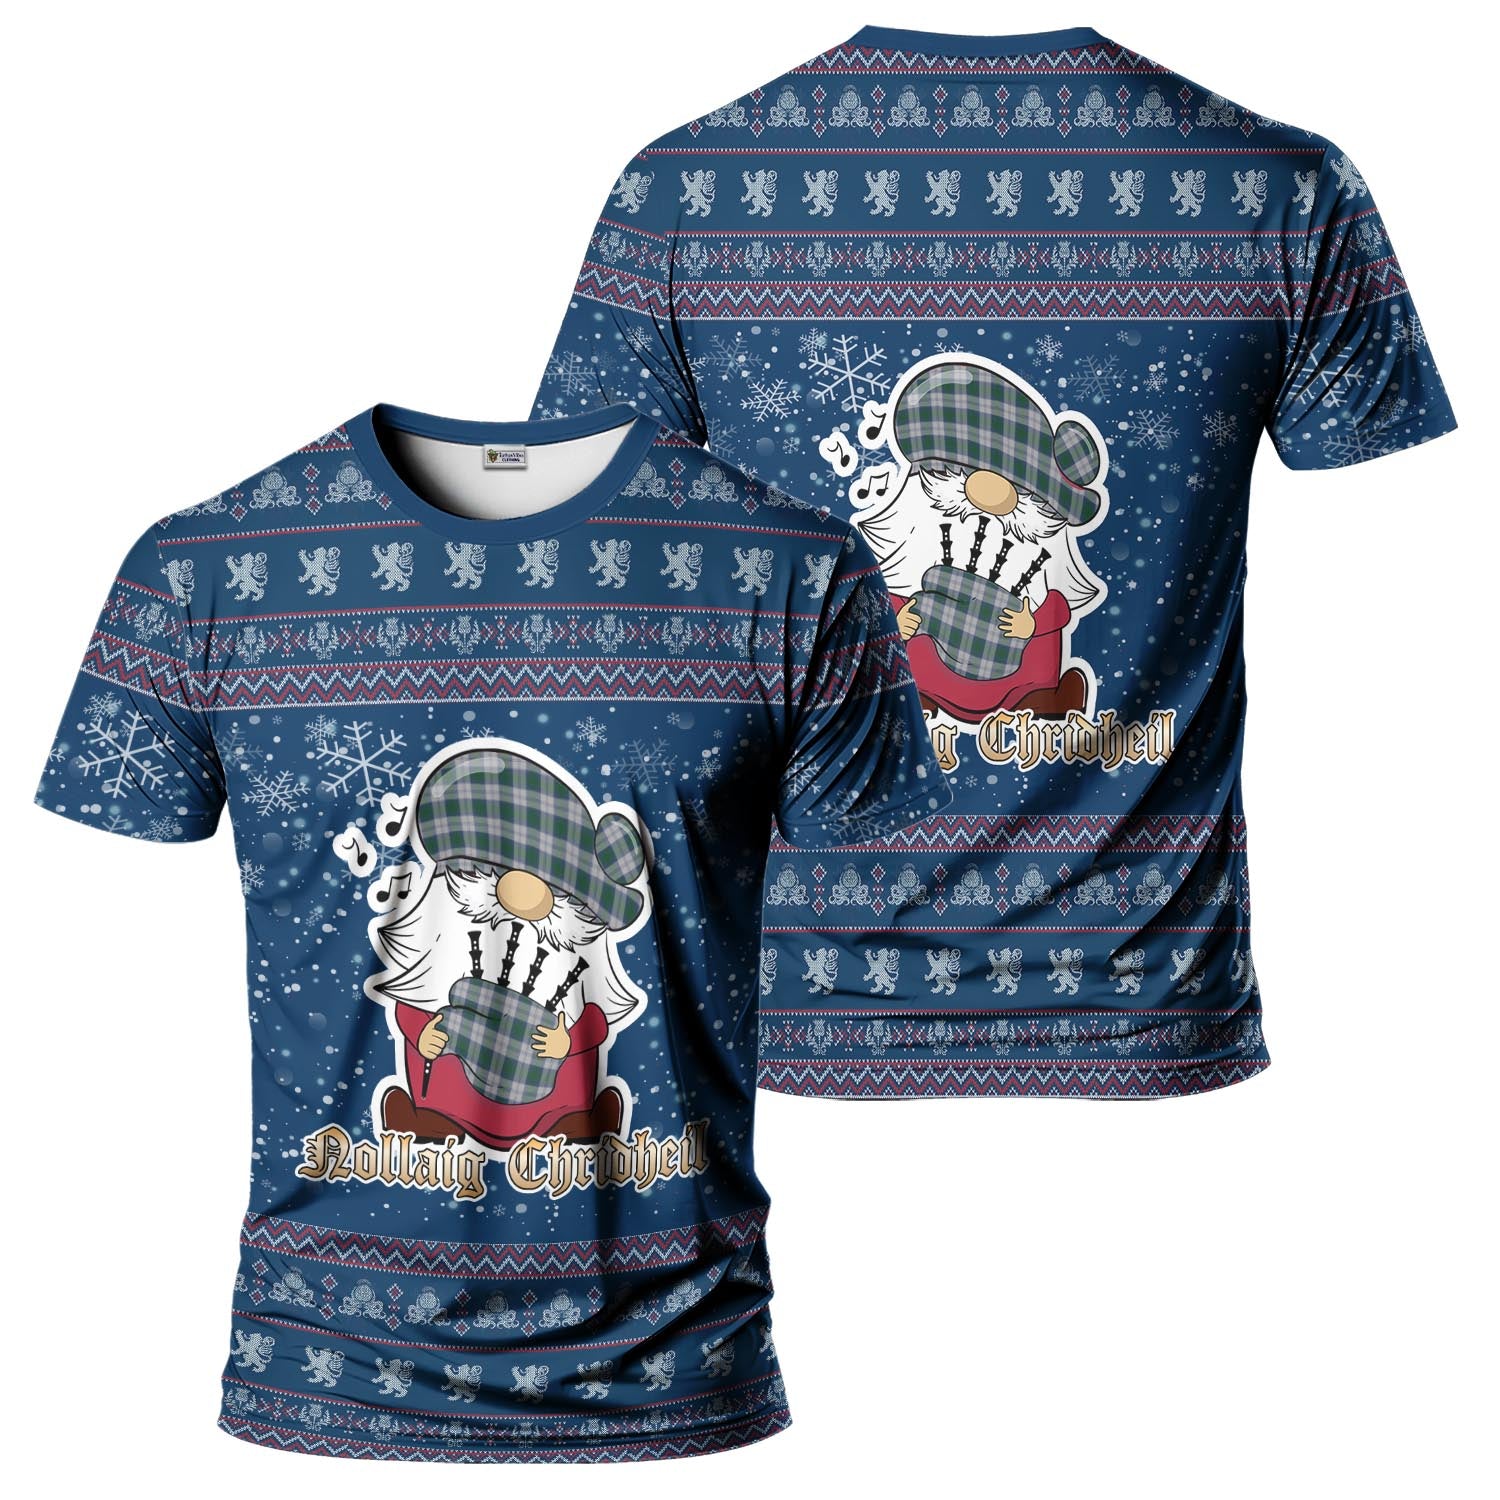 Lindsay Dress Clan Christmas Family T-Shirt with Funny Gnome Playing Bagpipes Kid's Shirt Blue - Tartanvibesclothing